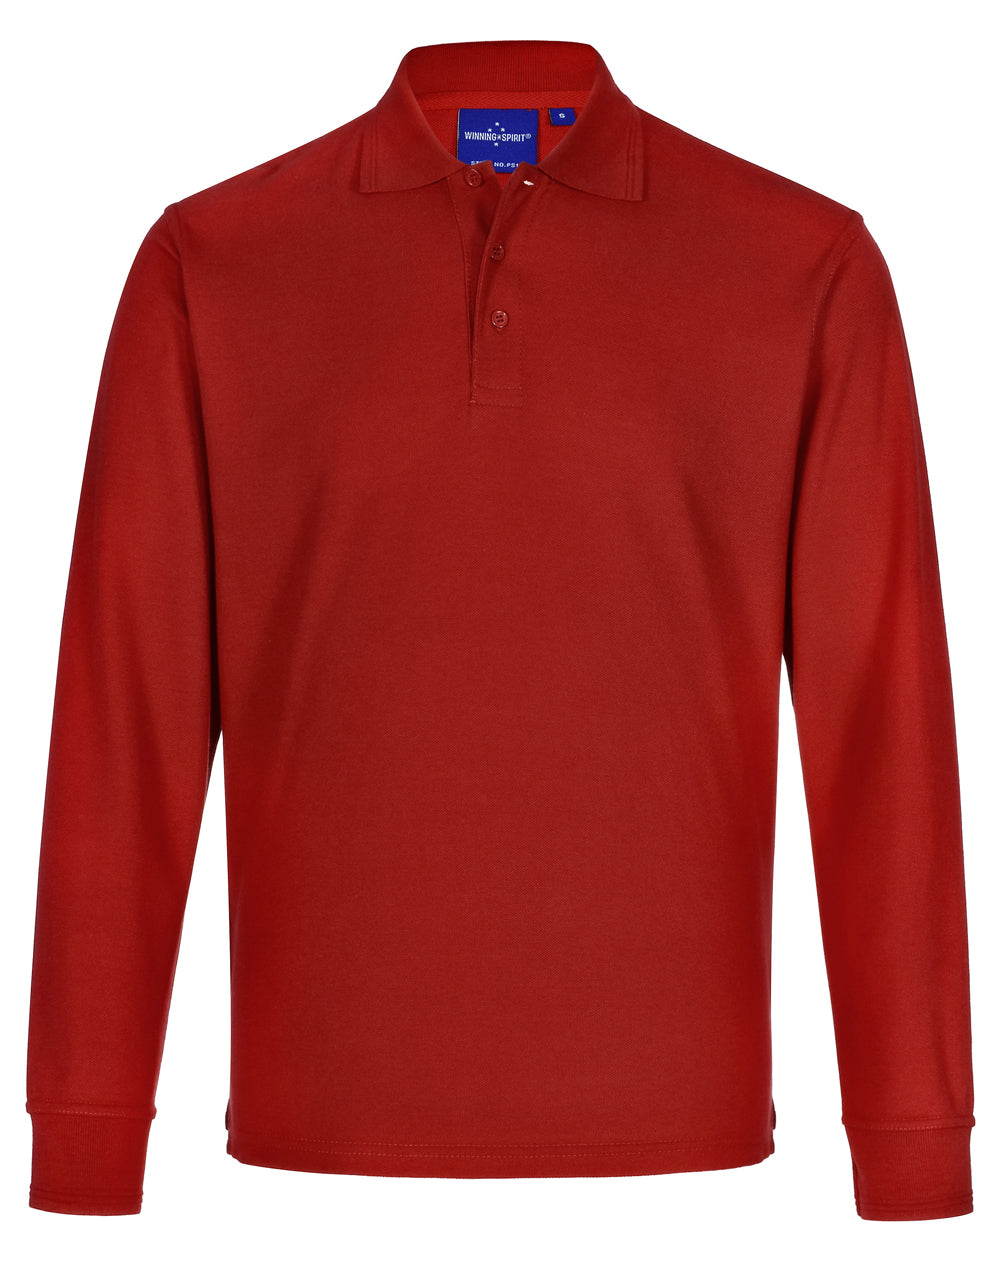 Winning Spirit Unisex Traditional Poly/Cotton Pique L/S Polo - PS12